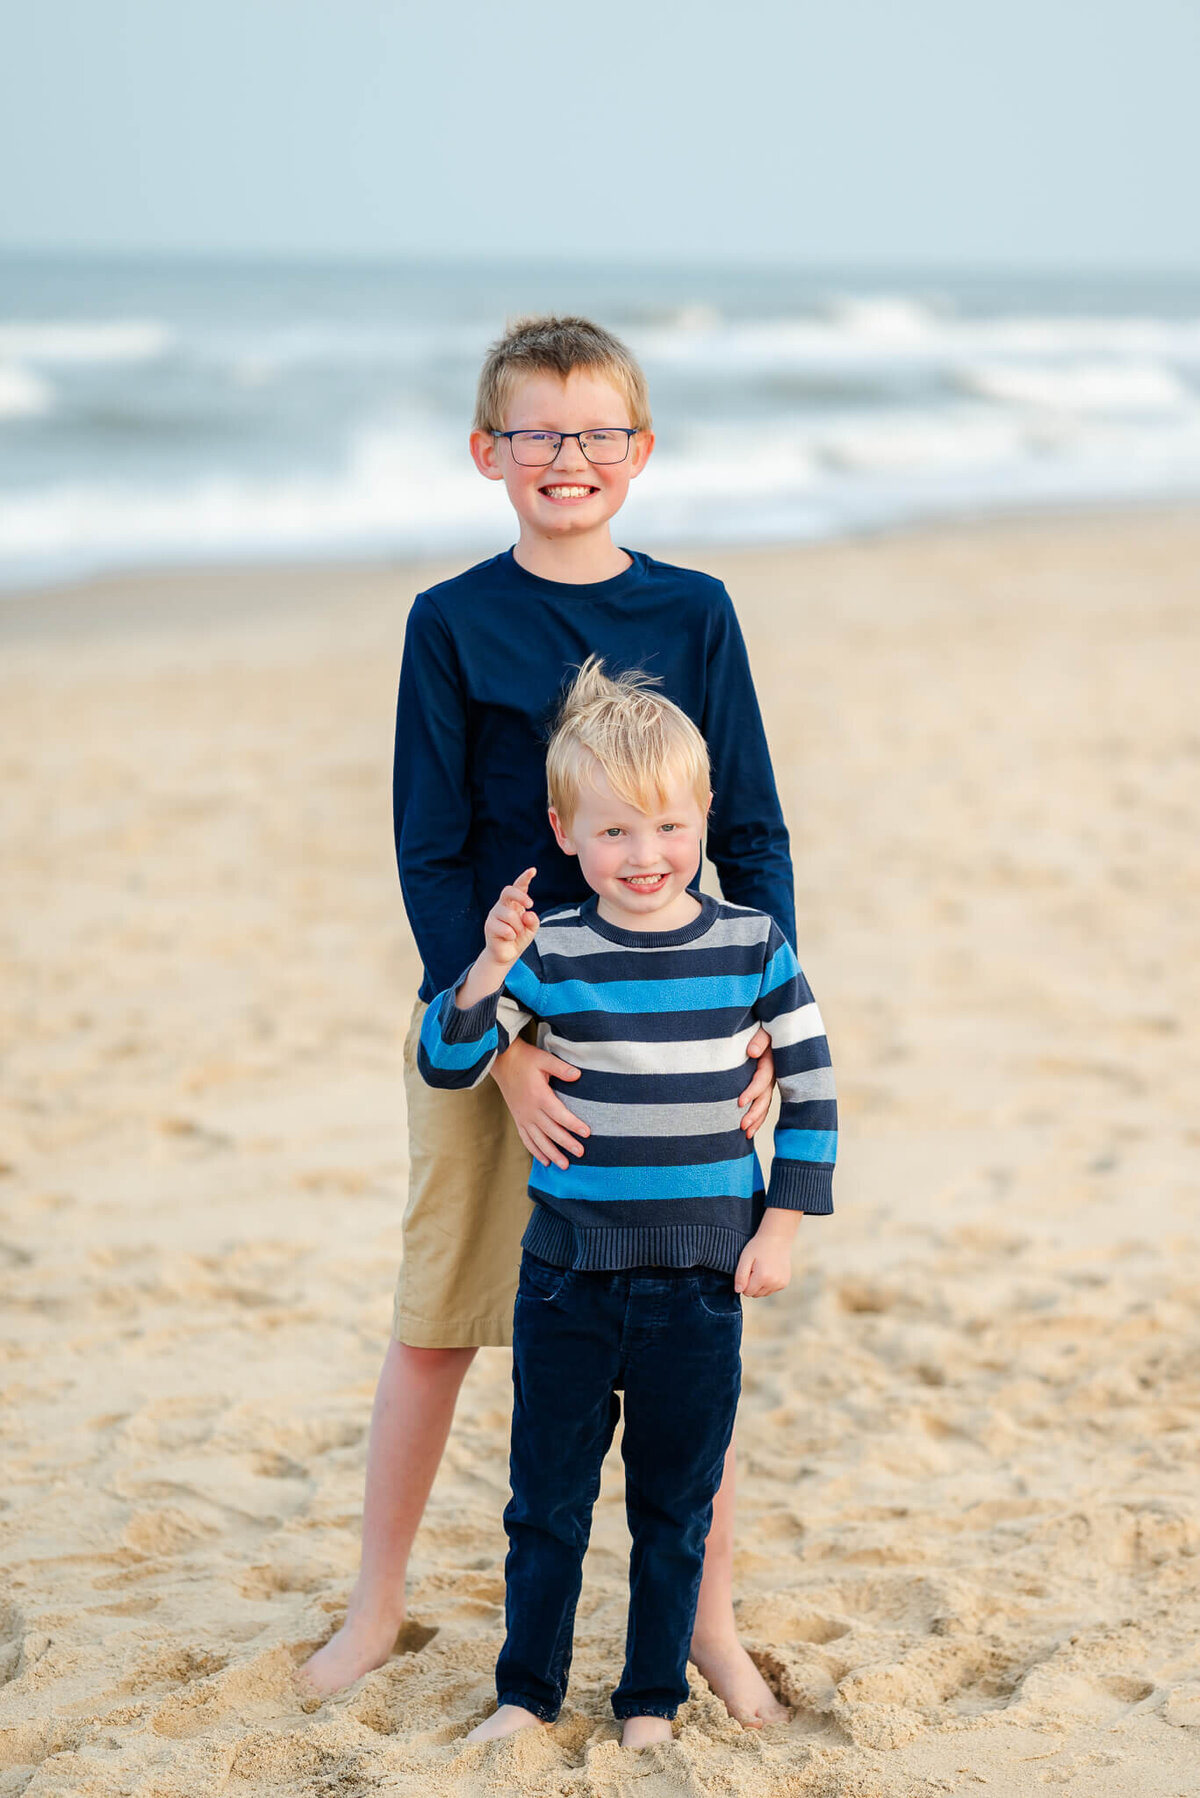 Justine Renee Photography captures a picture of two brothers in front of the  water at an Outer Banks beach. The boys are all smiles for the photo.